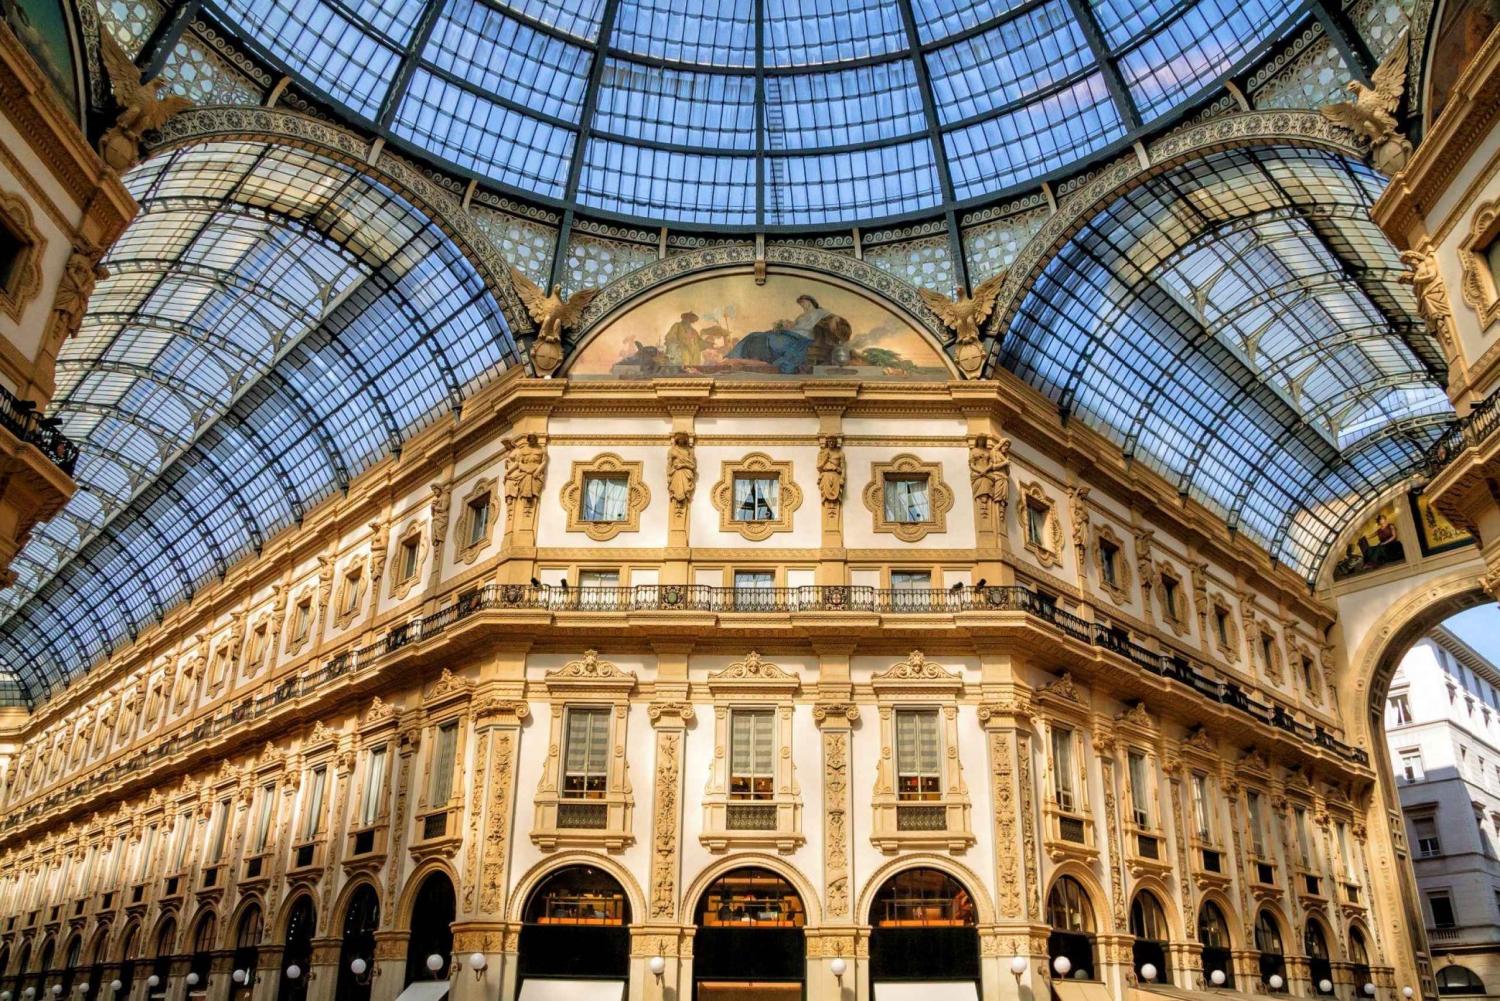 Magic of Milan: Full Day Small Group Tour of the Highlights